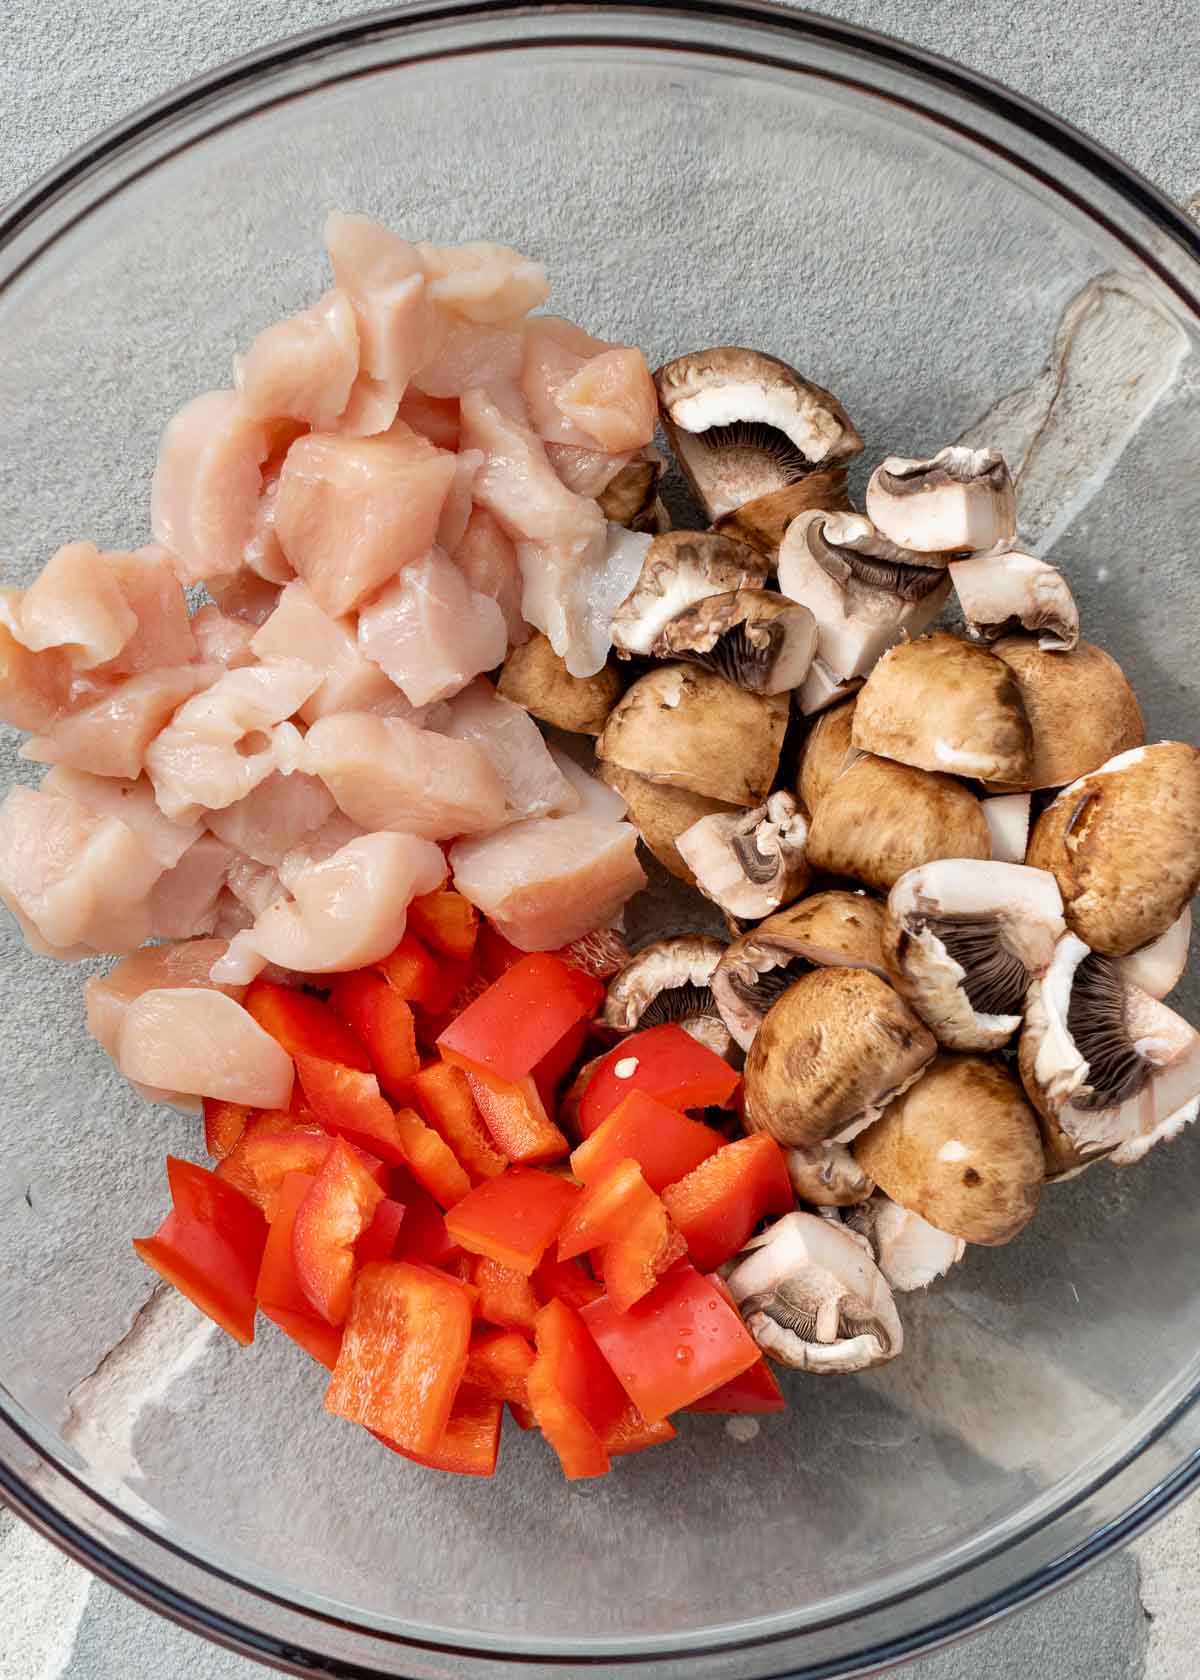 bite-size chicken, mushrooms, and red peppers in a glass bowl